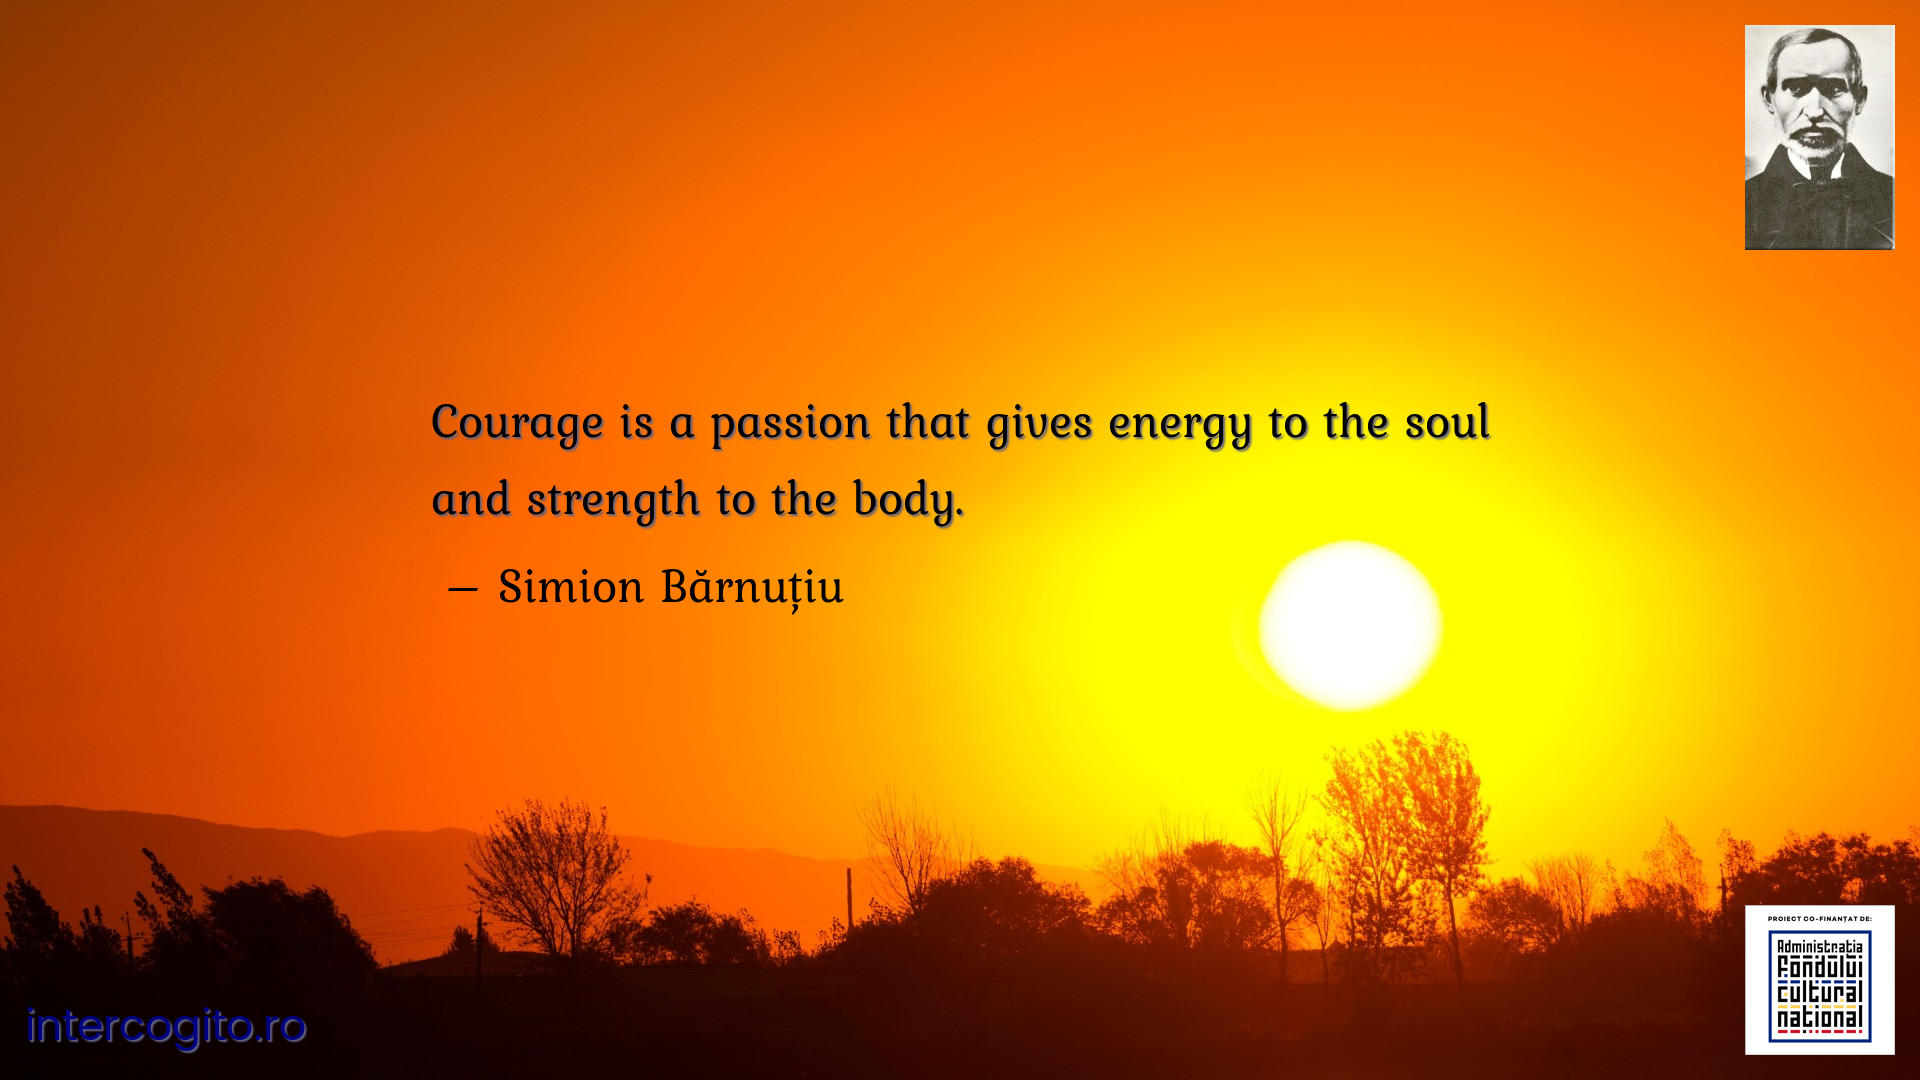 Courage is a passion that gives energy to the soul and strength to the body.